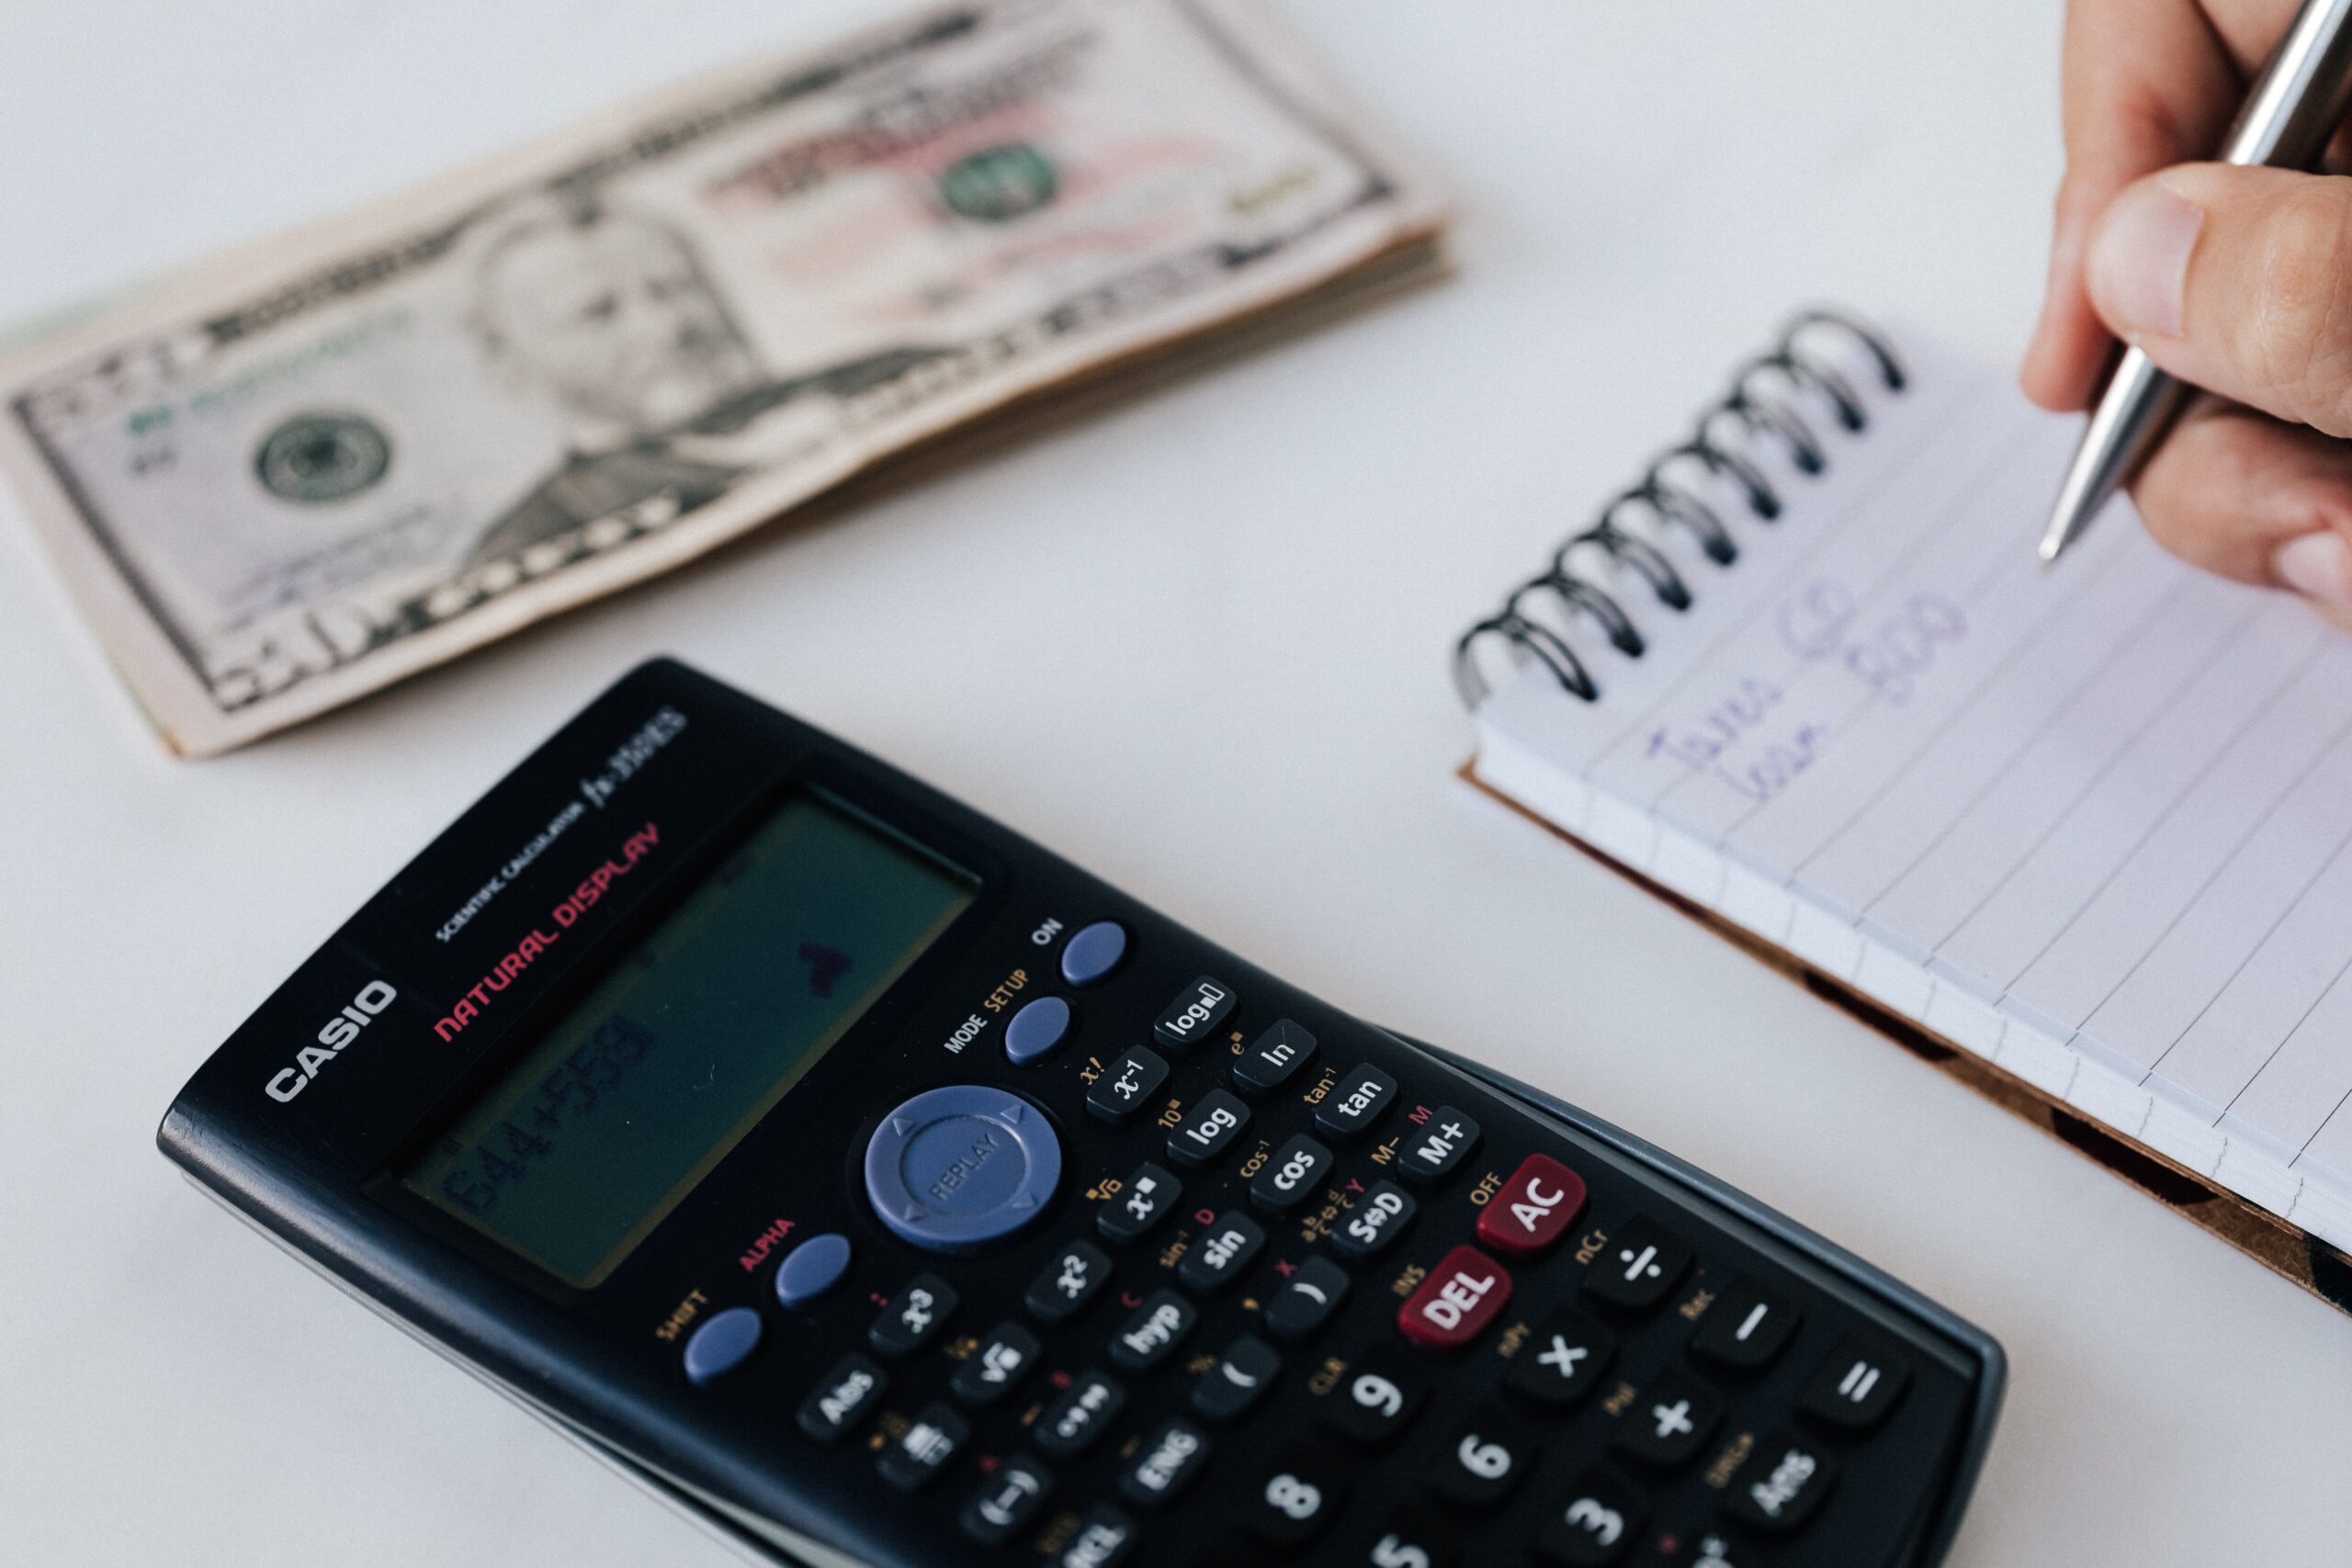 Casio calculator on a white table next to a stack of $50 bills while a person writes on a small notepad